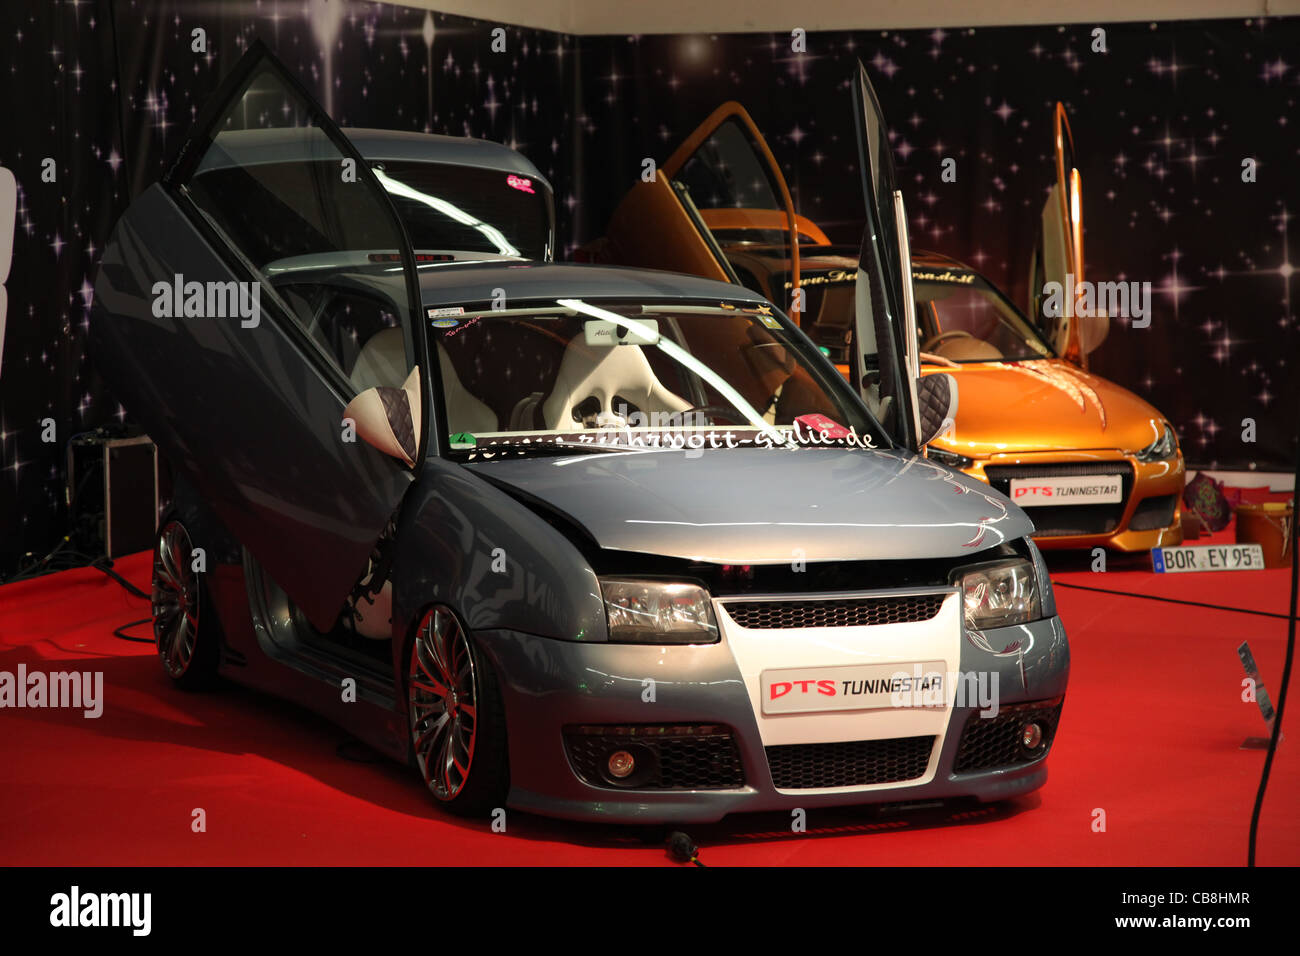 https://c8.alamy.com/comp/CB8HMR/vw-lupo-with-gull-wing-doors-from-dts-tuningstar-shown-at-the-essen-CB8HMR.jpg